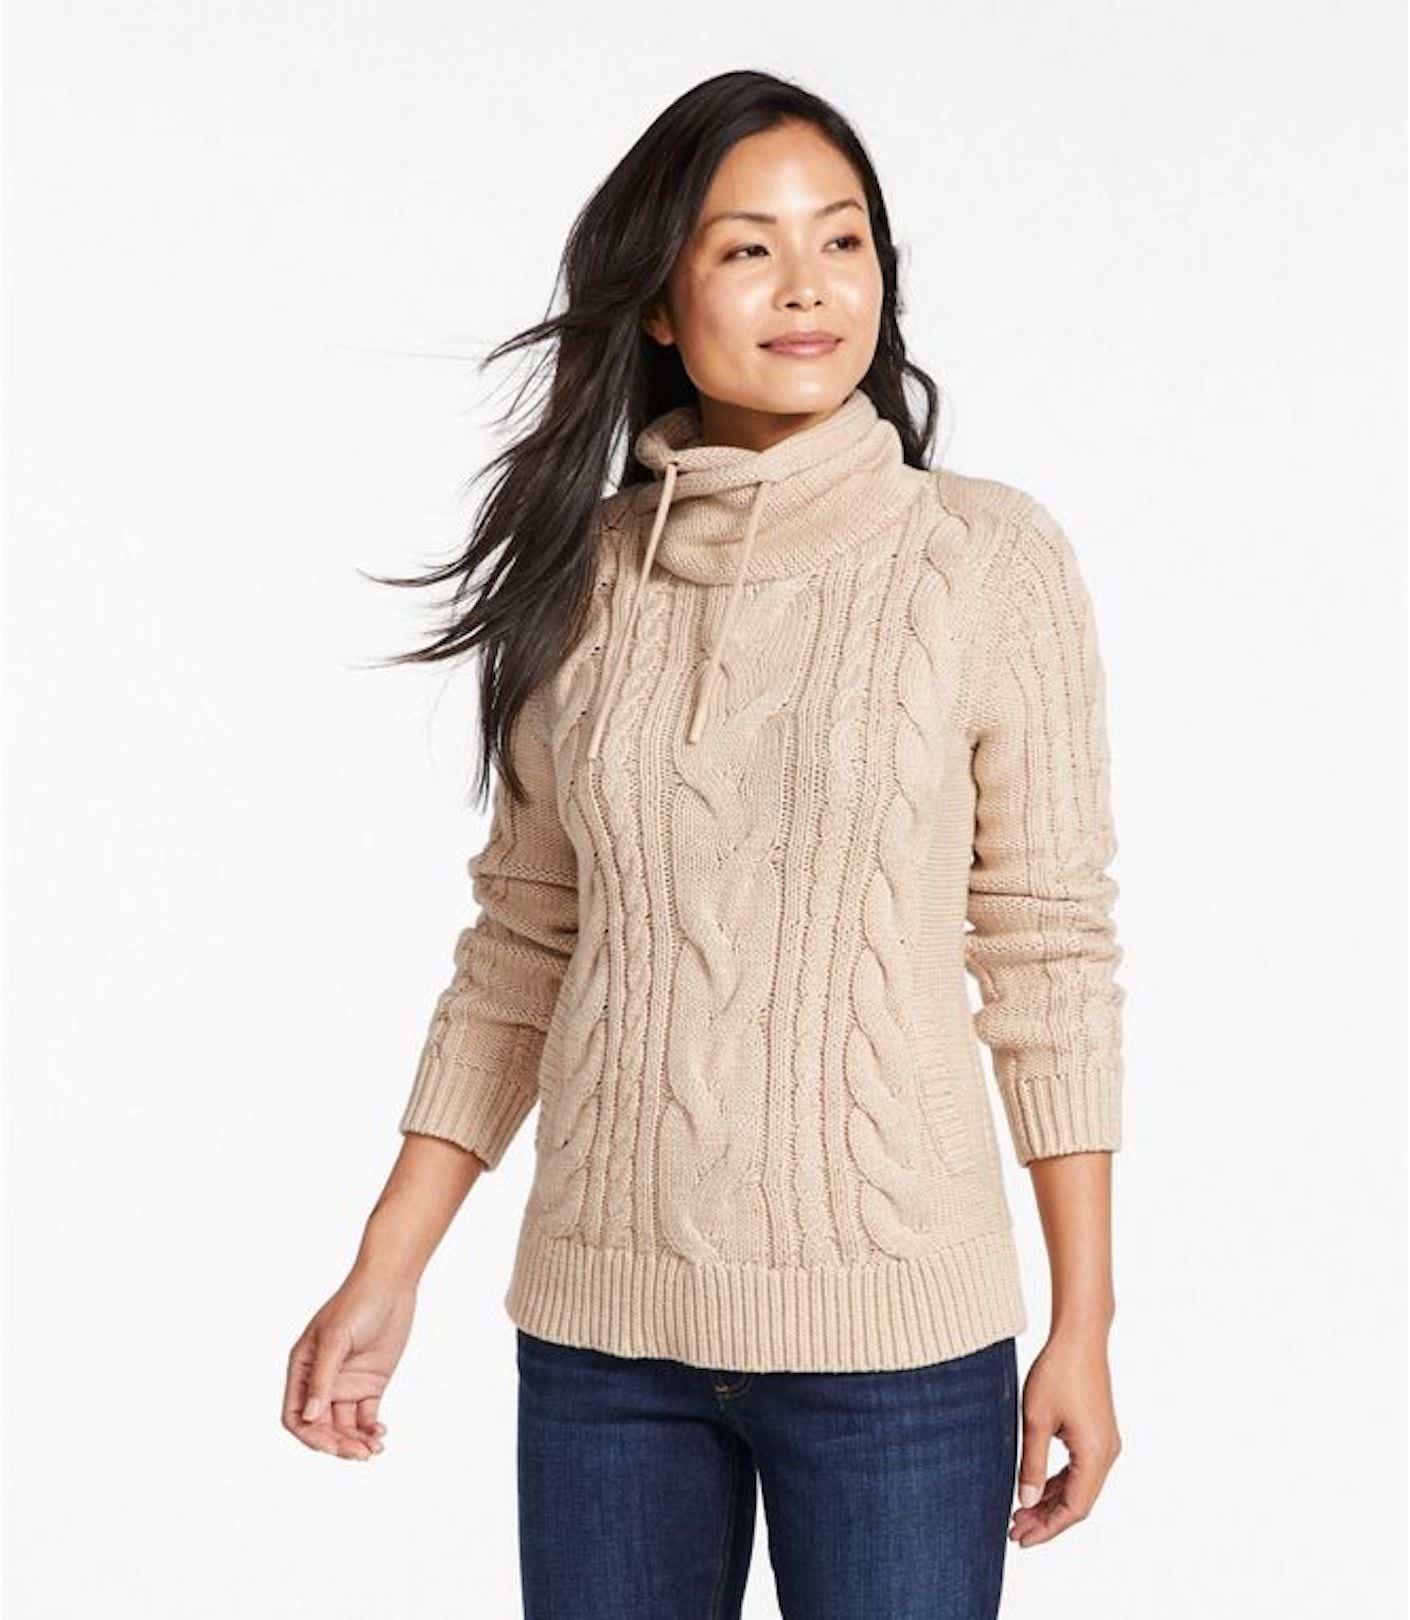 A woman wears a pull over sweater with an drawstring-adjustable turtleneck that is hip-length and beige.